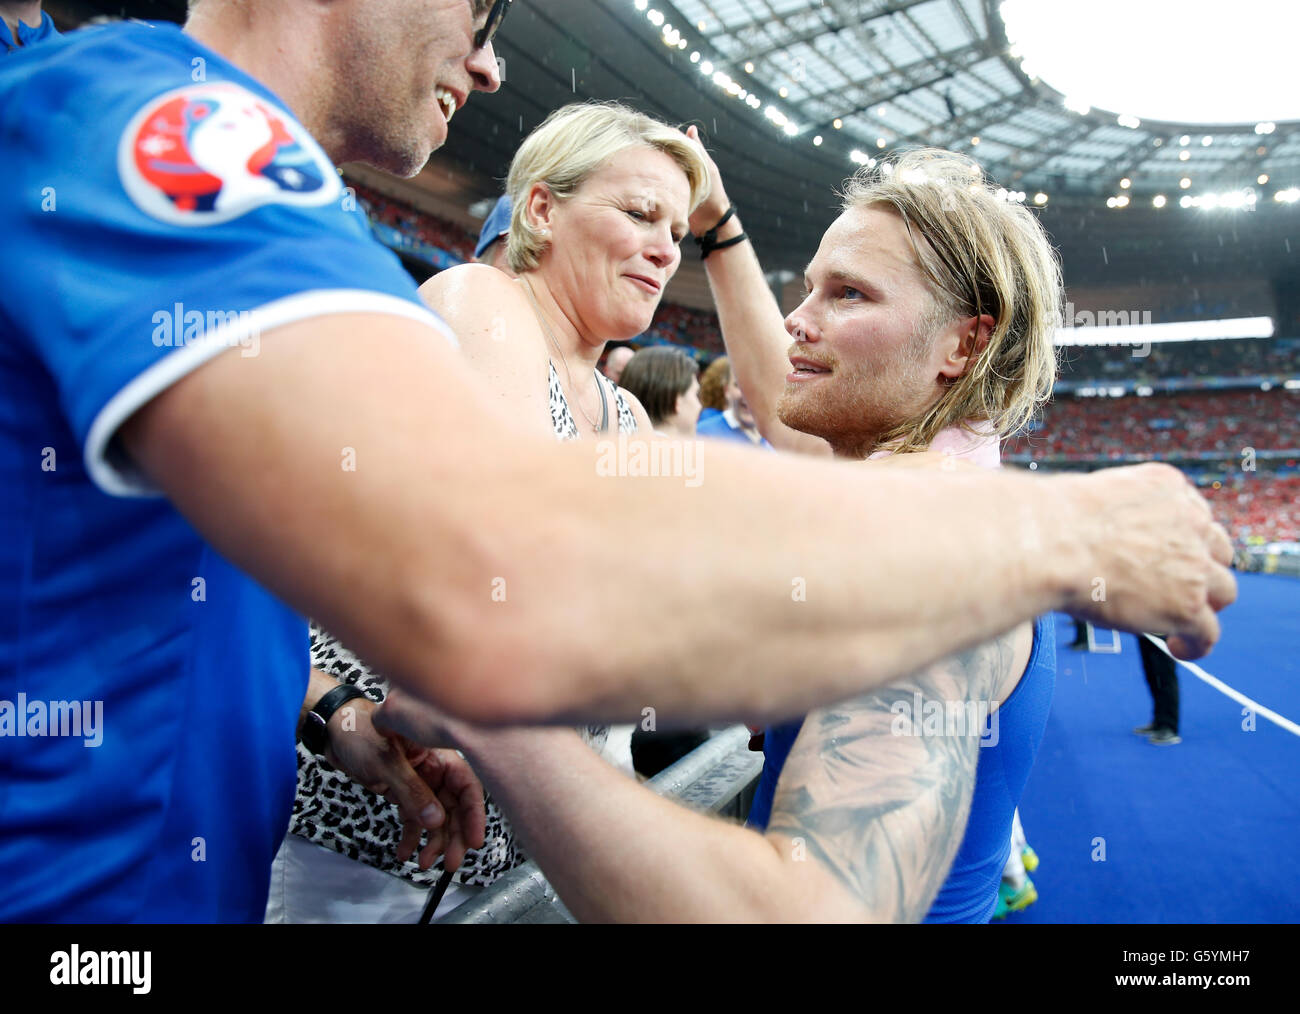 Iceland's Birkir Bjarnason celebrates with his family after the Euro 2016, Group F match at the Stade de France, Paris. PRESS ASSOCIATION Photo. Picture date: Wednesday June 22, 2016. See PA story SOCCER Iceland. Photo credit should read: Owen Humphreys/PA Wire. RESTRICTIONS: Use subject to restrictions. Editorial use only. Book and magazine sales permitted providing not solely devoted to any one team/player/match. No commercial use. Call +44 (0)1158 447447 for further information. Stock Photo